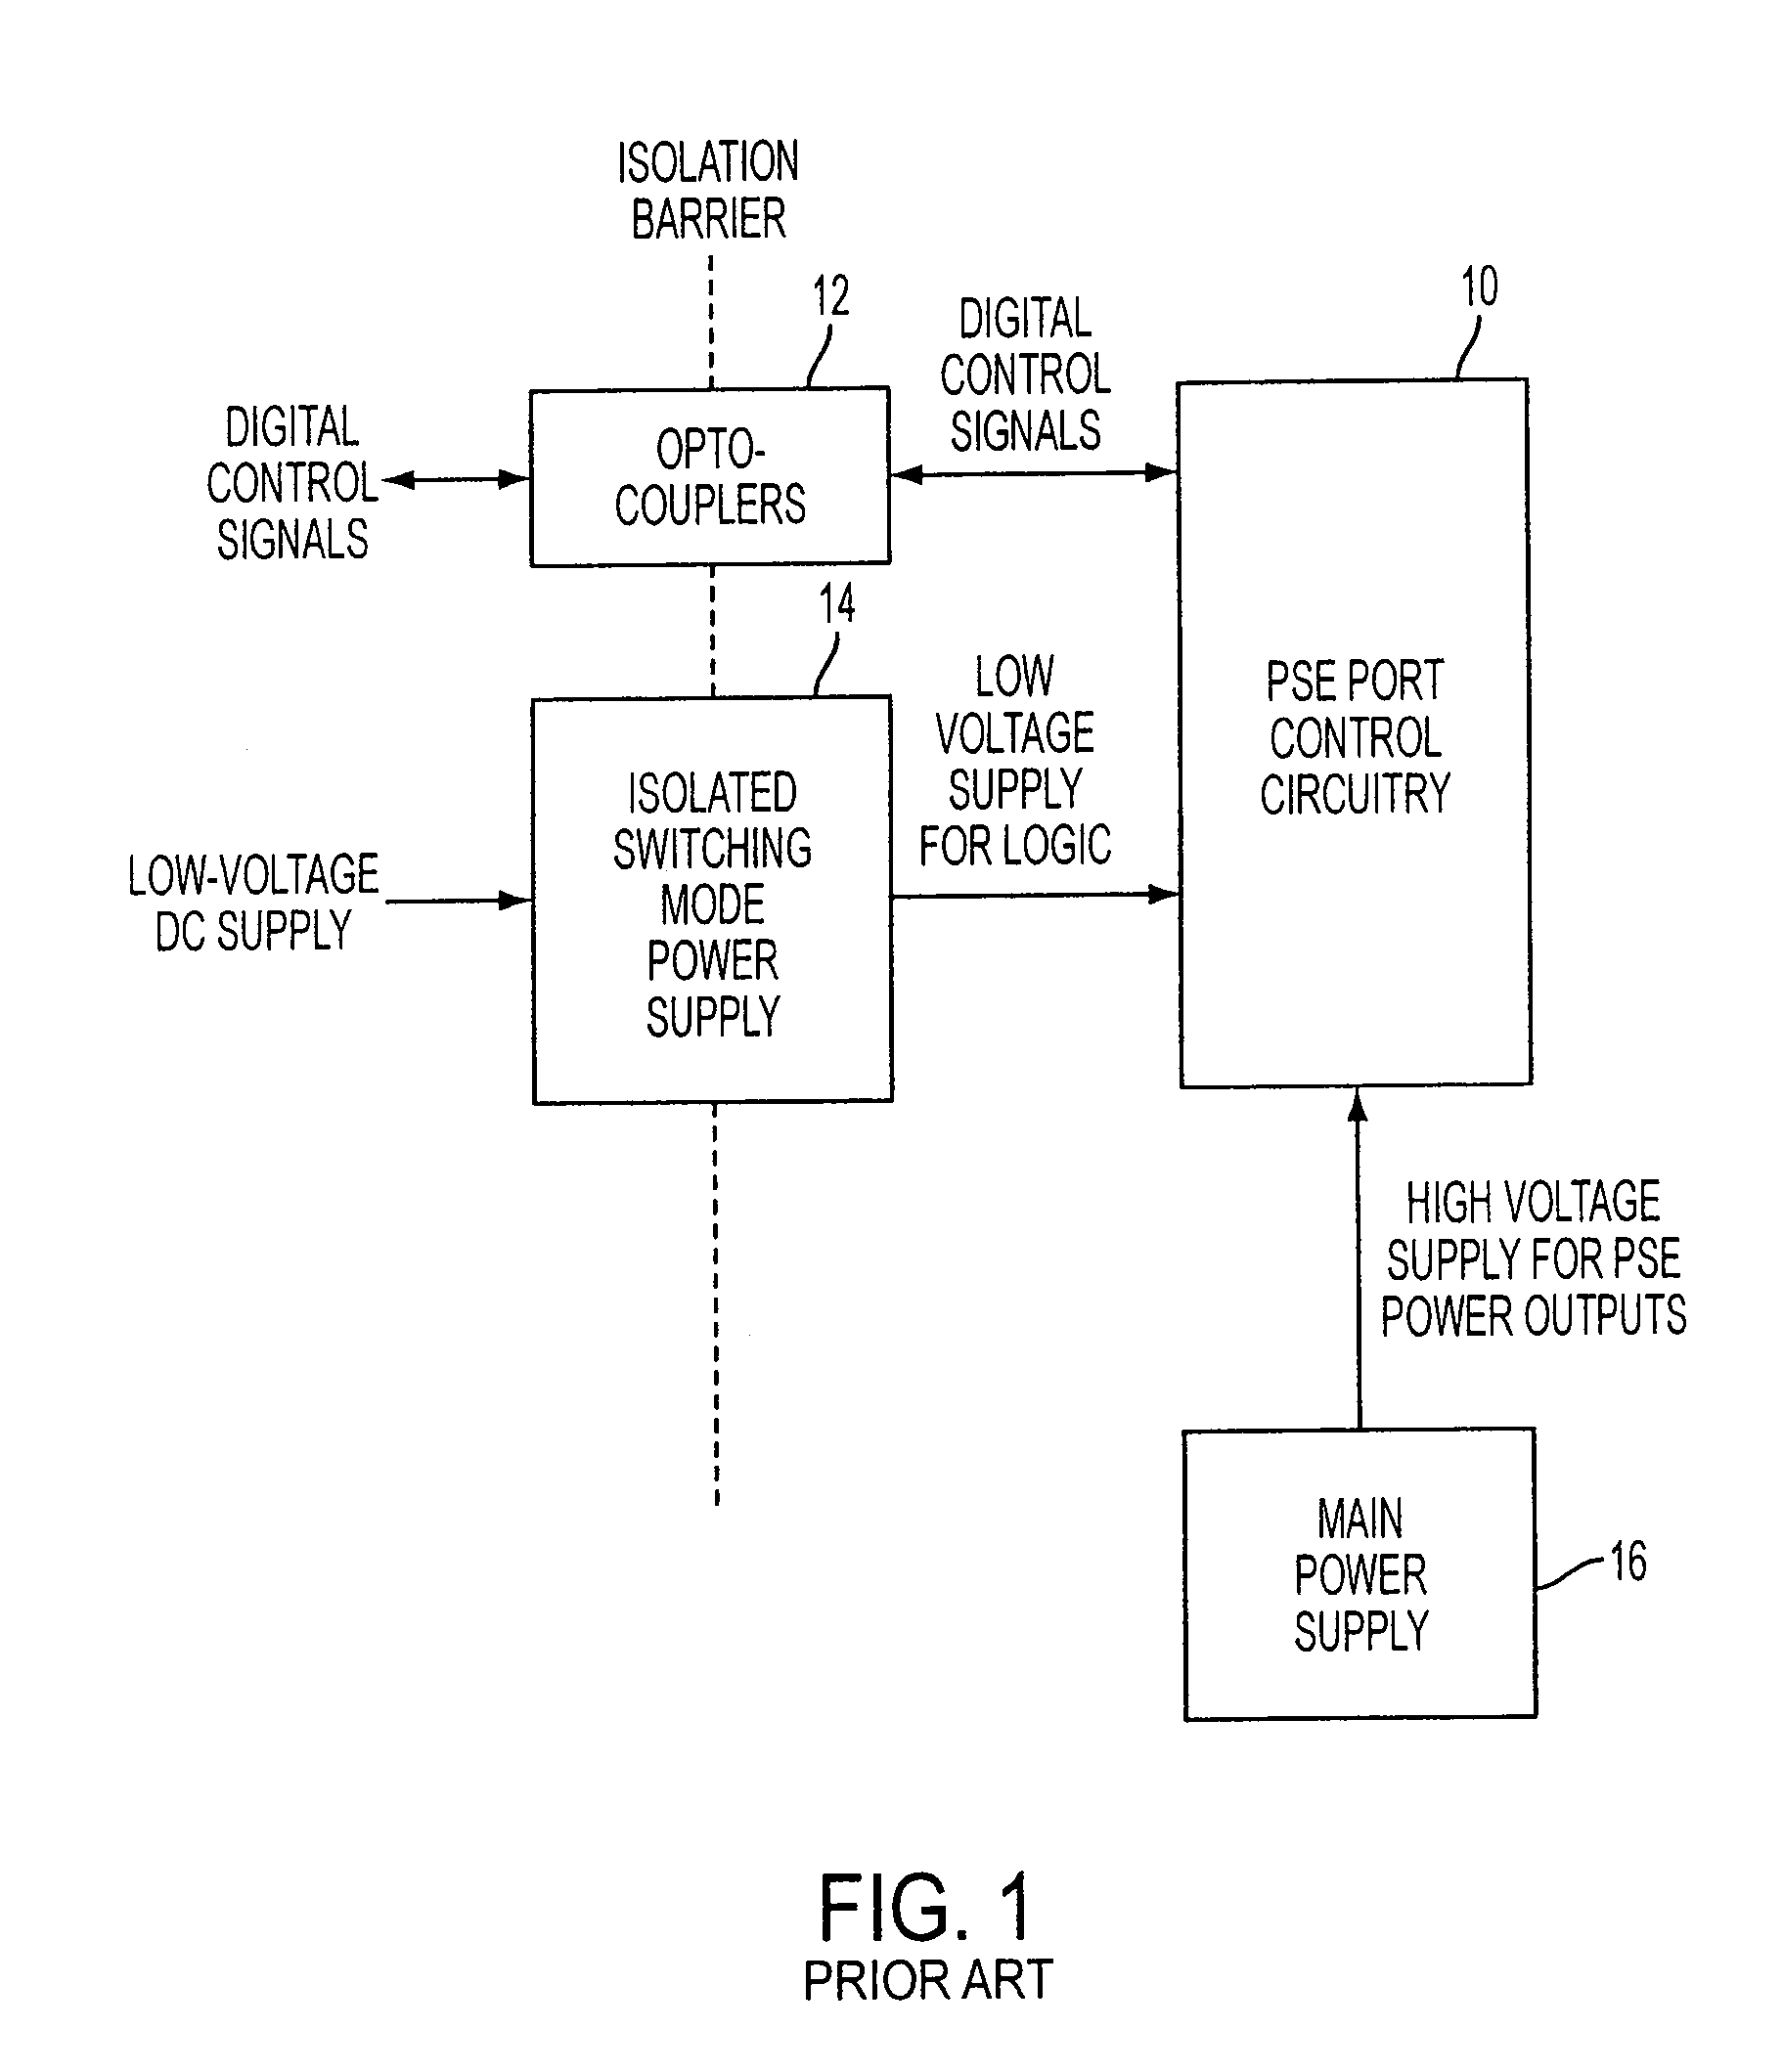 Magnetic isolation of power sourcing equipment control circuitry